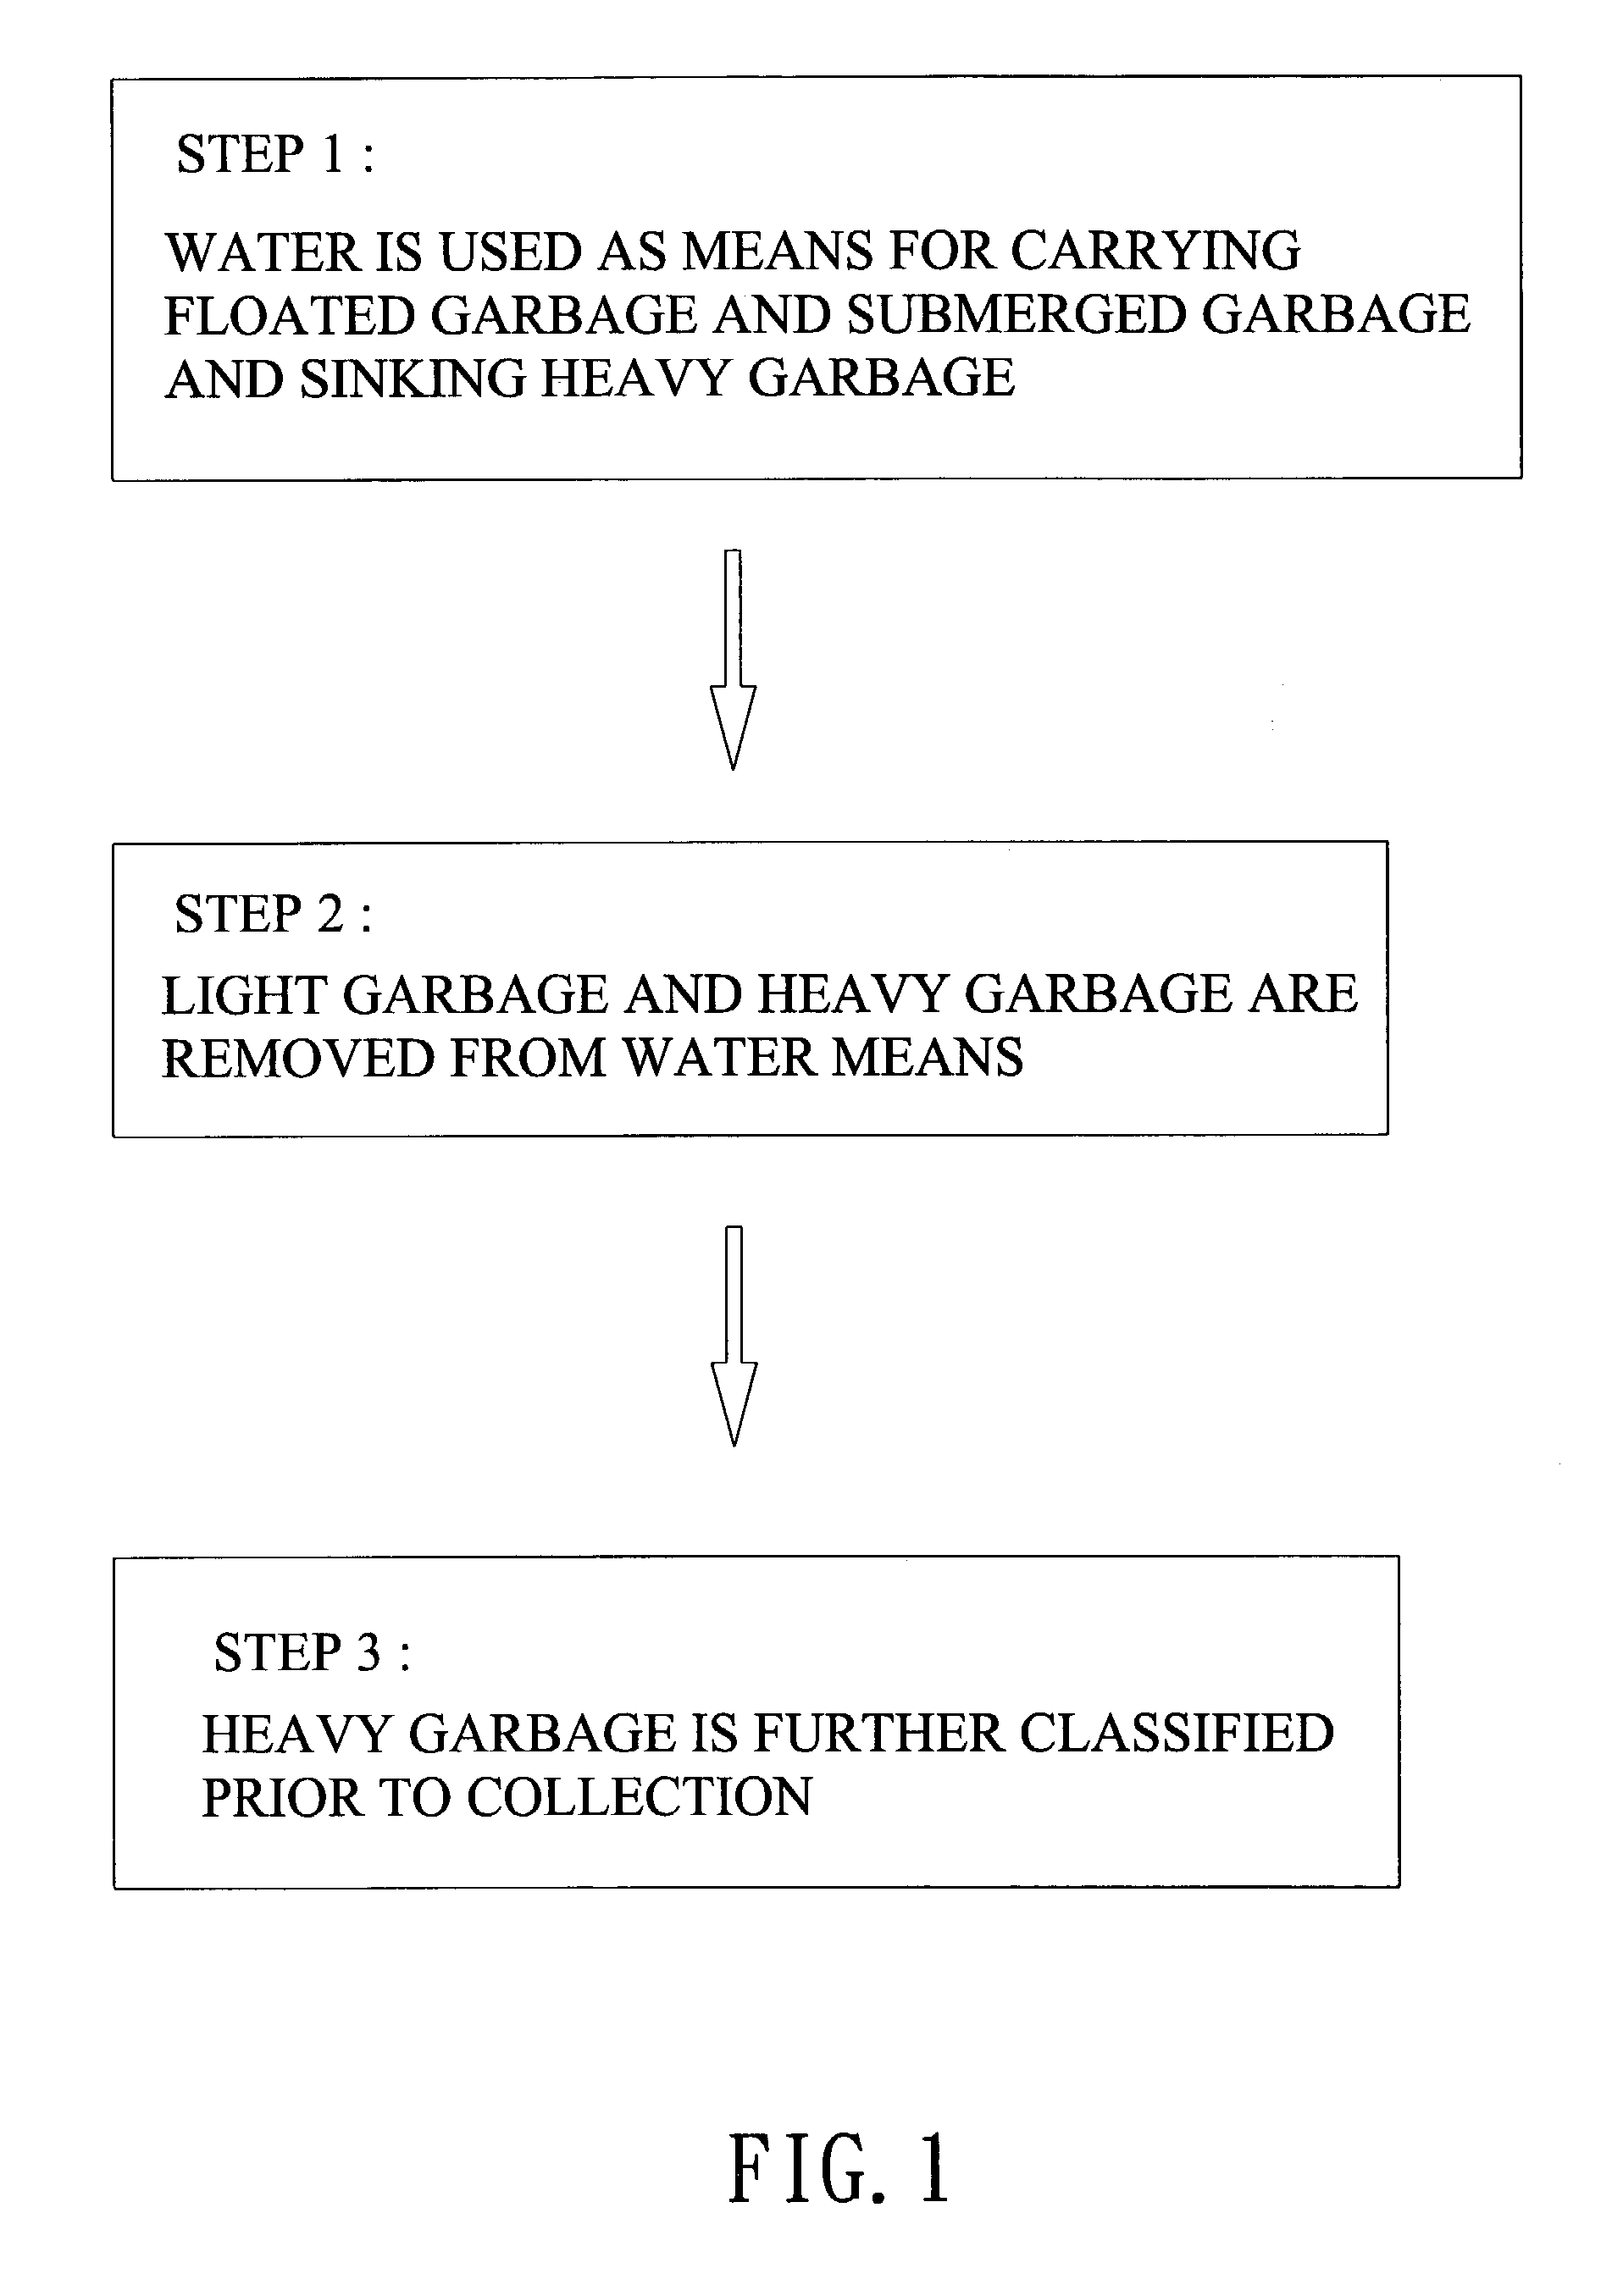 Apparatus and method of separating heavy materials in garbage from light ones and classifying the heavy garbage for collection